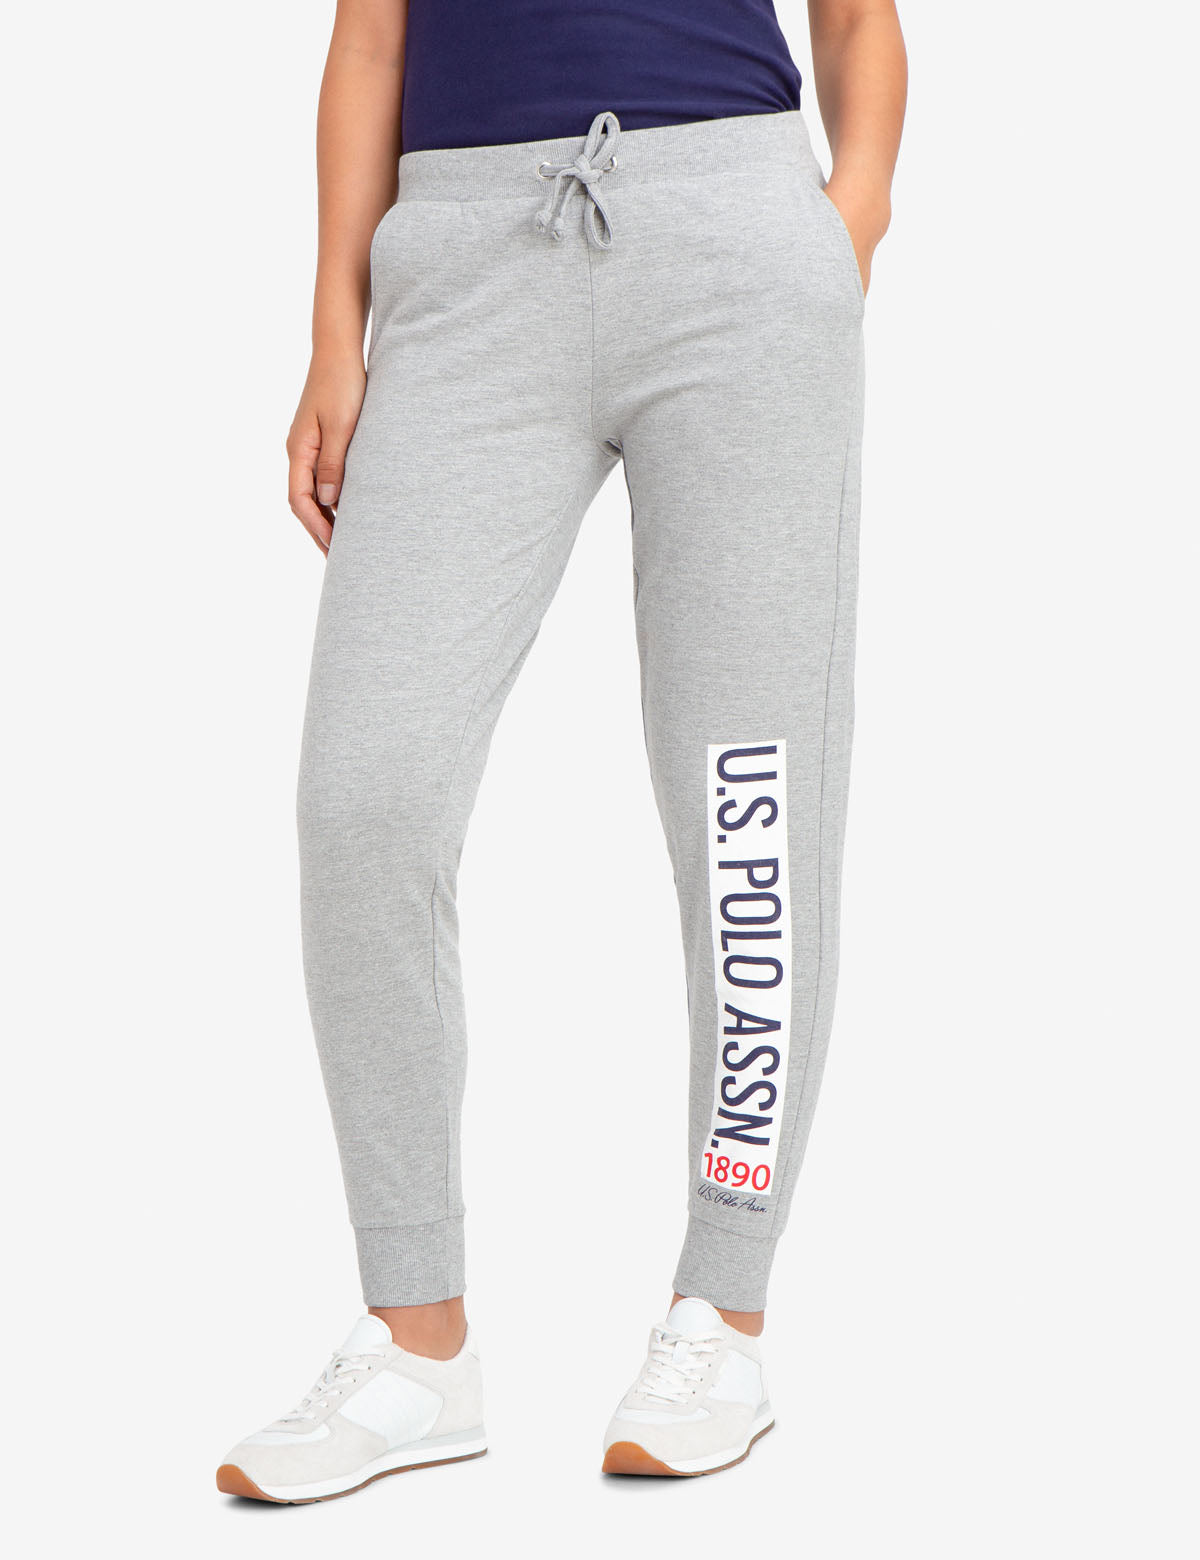 U S Polo Assn Grey Track Pant #I672 at Rs 899.00, Track Pant